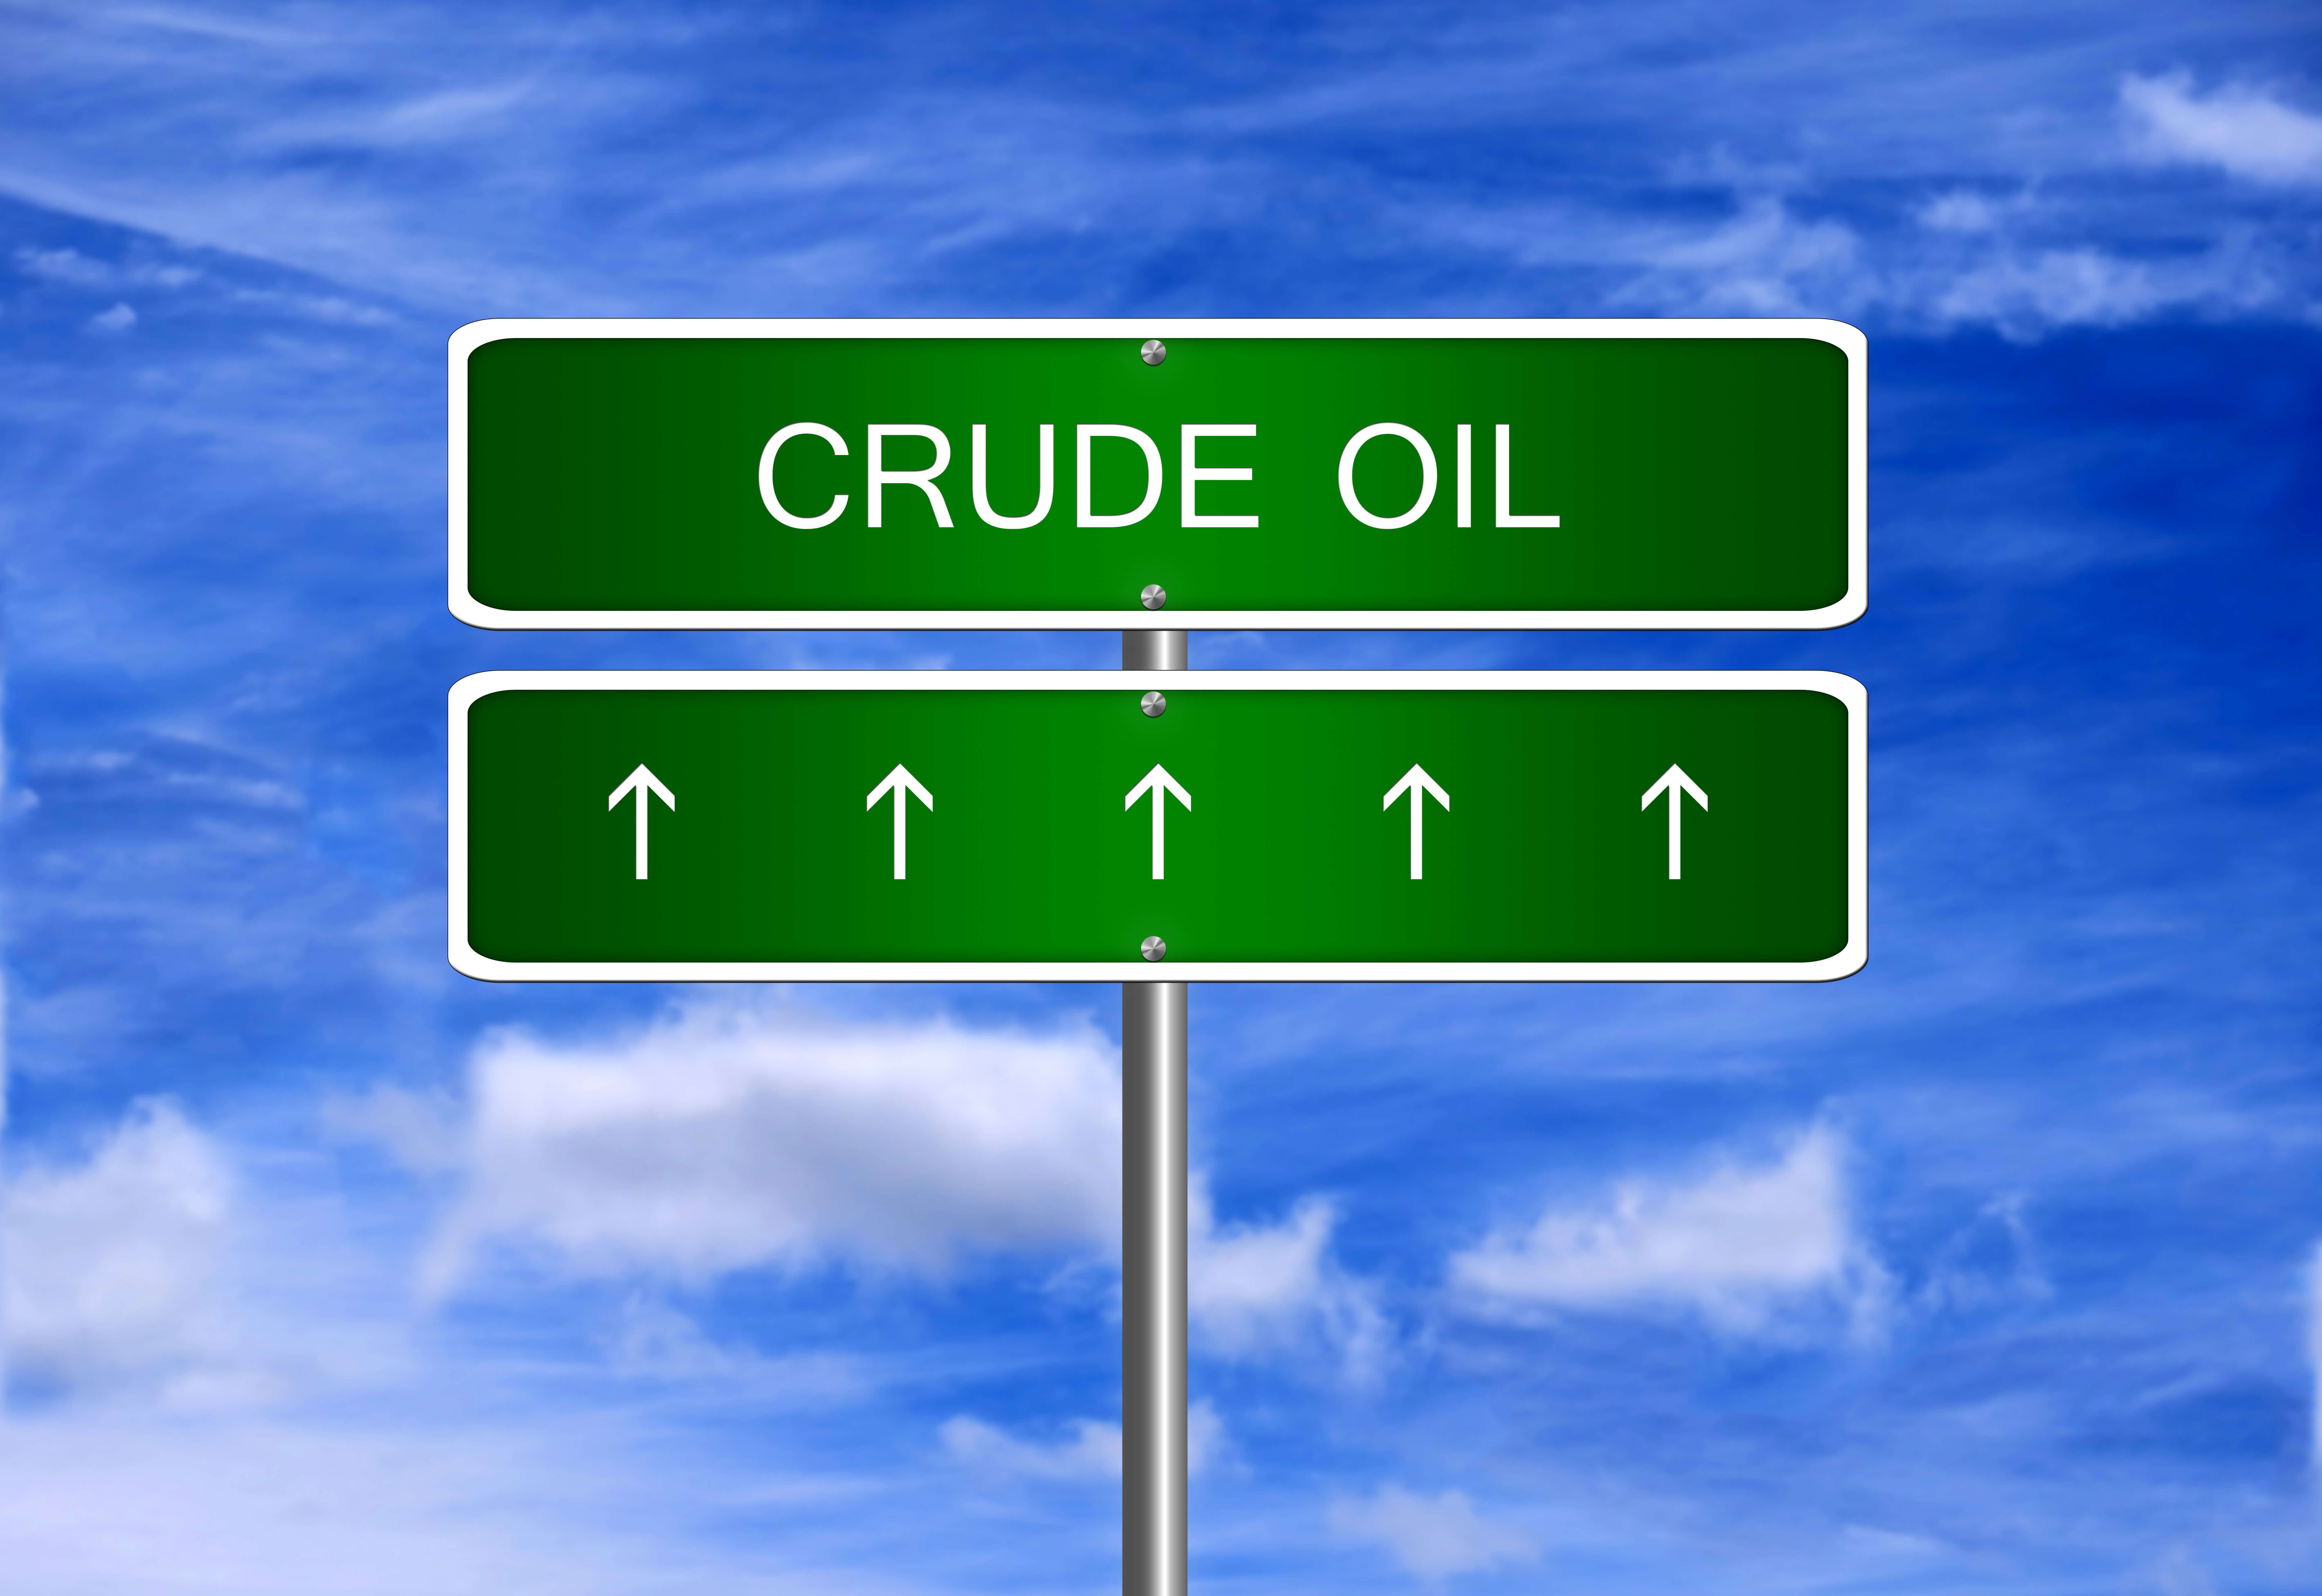 WTI crude oil price is strengthening its position